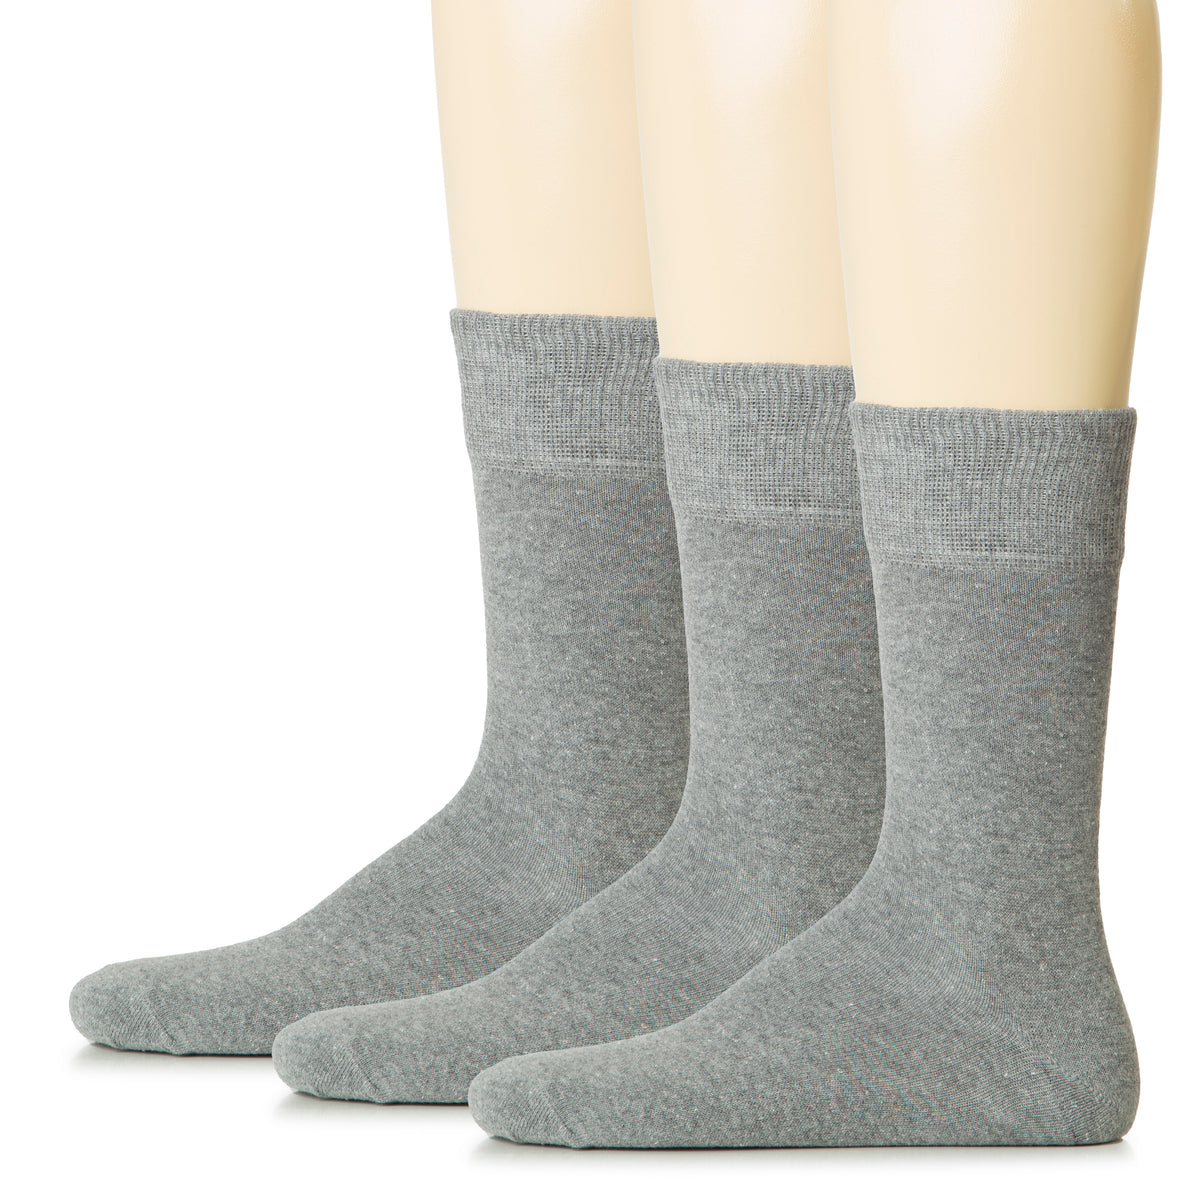 Keep your feet cozy and stylish with these three pairs of men's grey cotton crew socks.